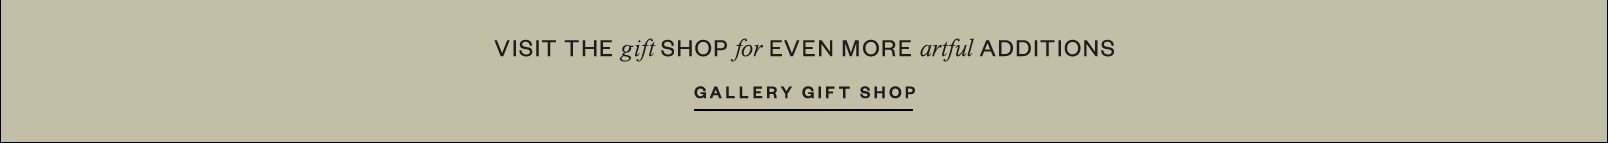 Gallery Gift Shop